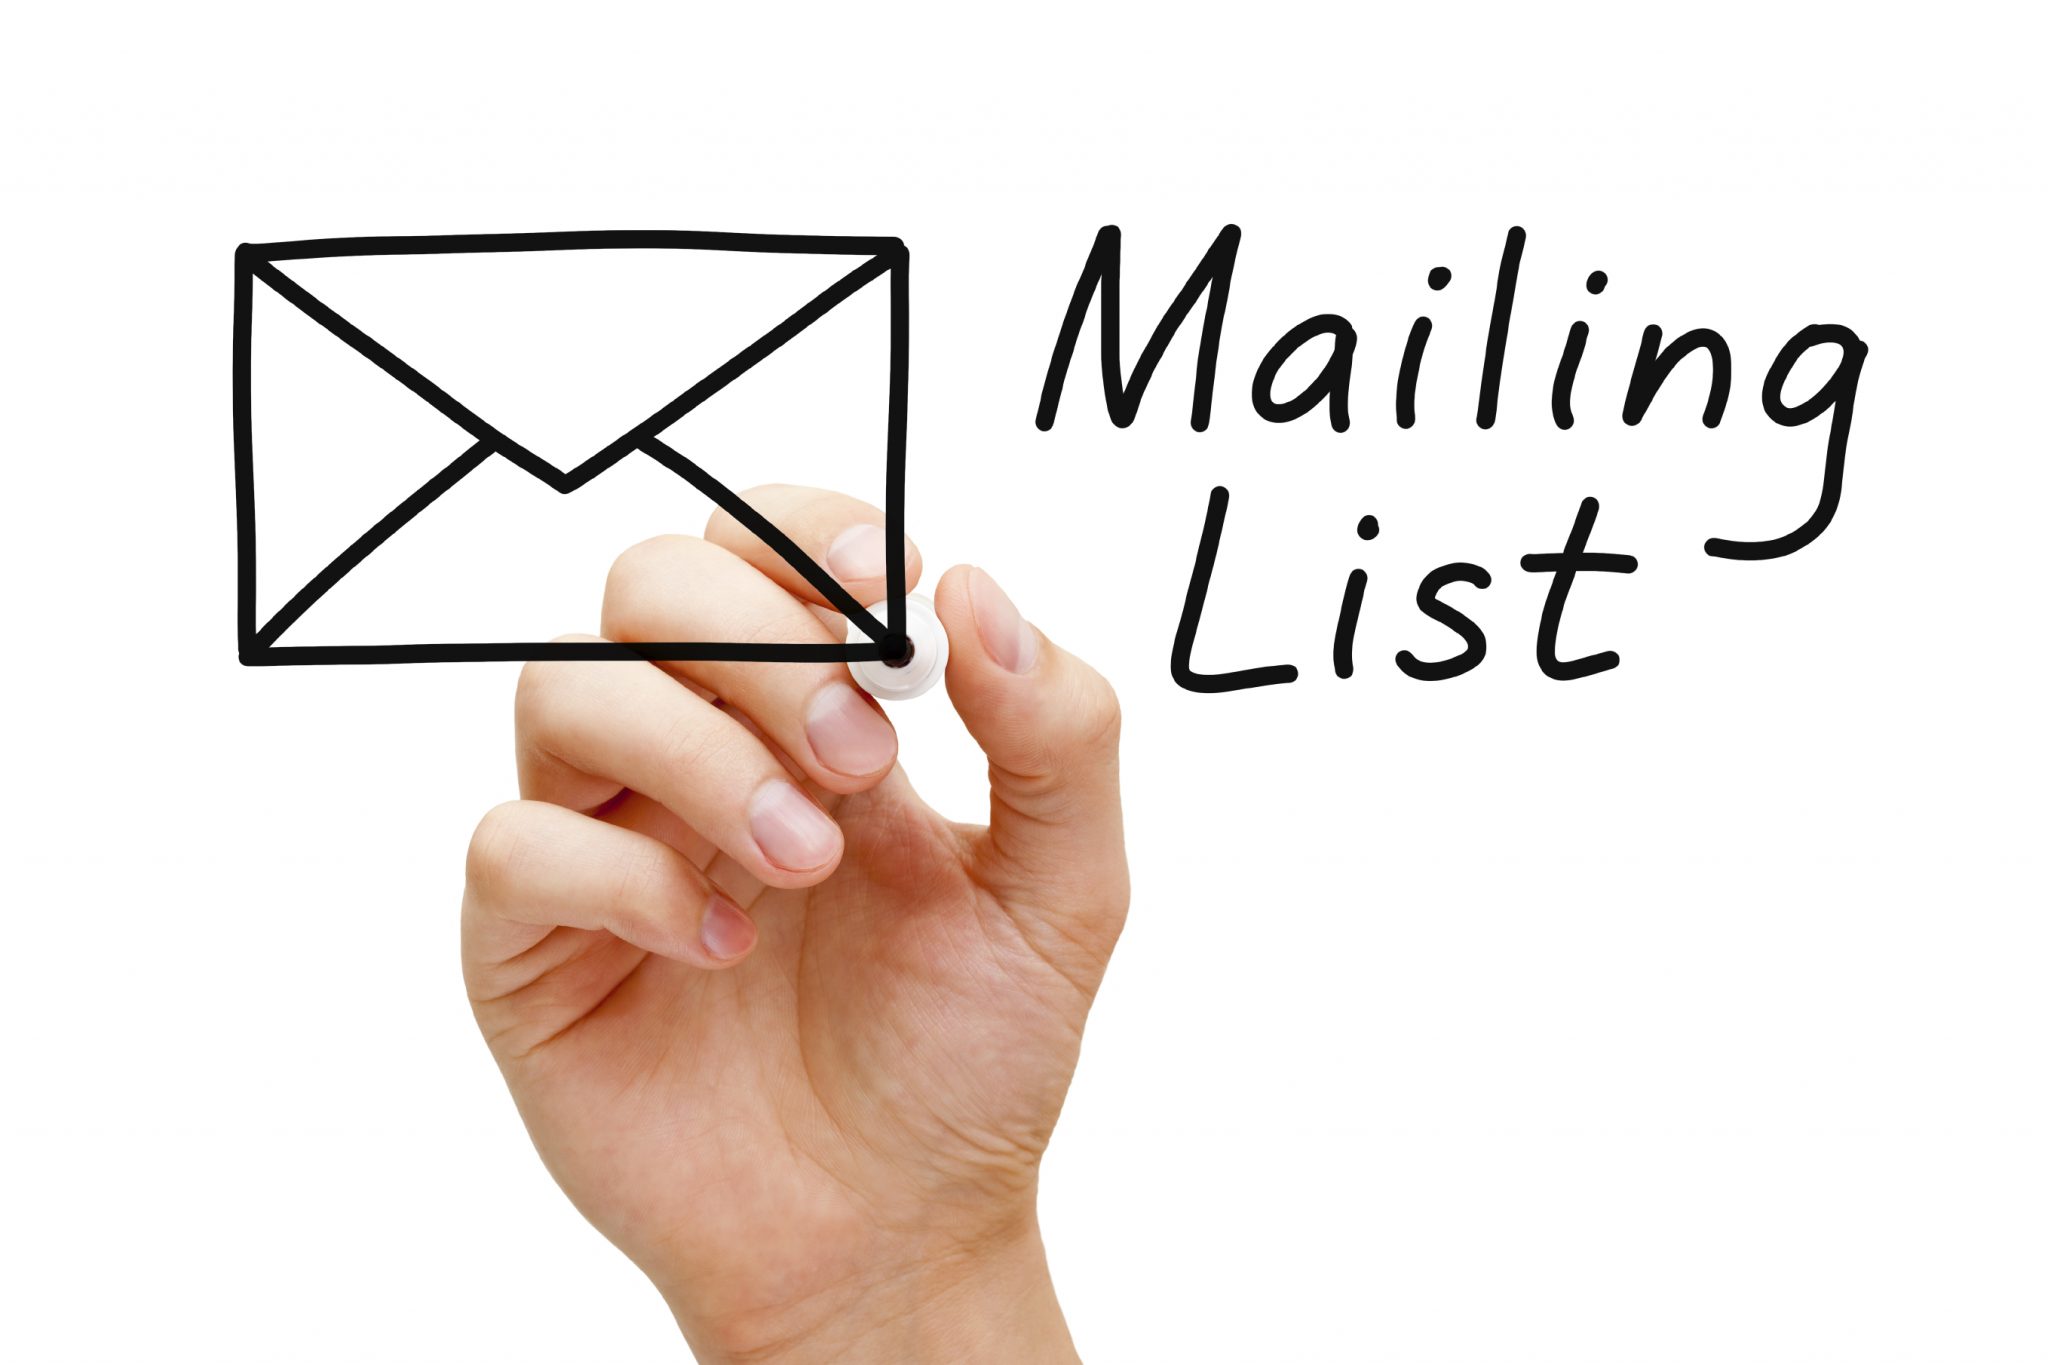 email vs social: mailing list